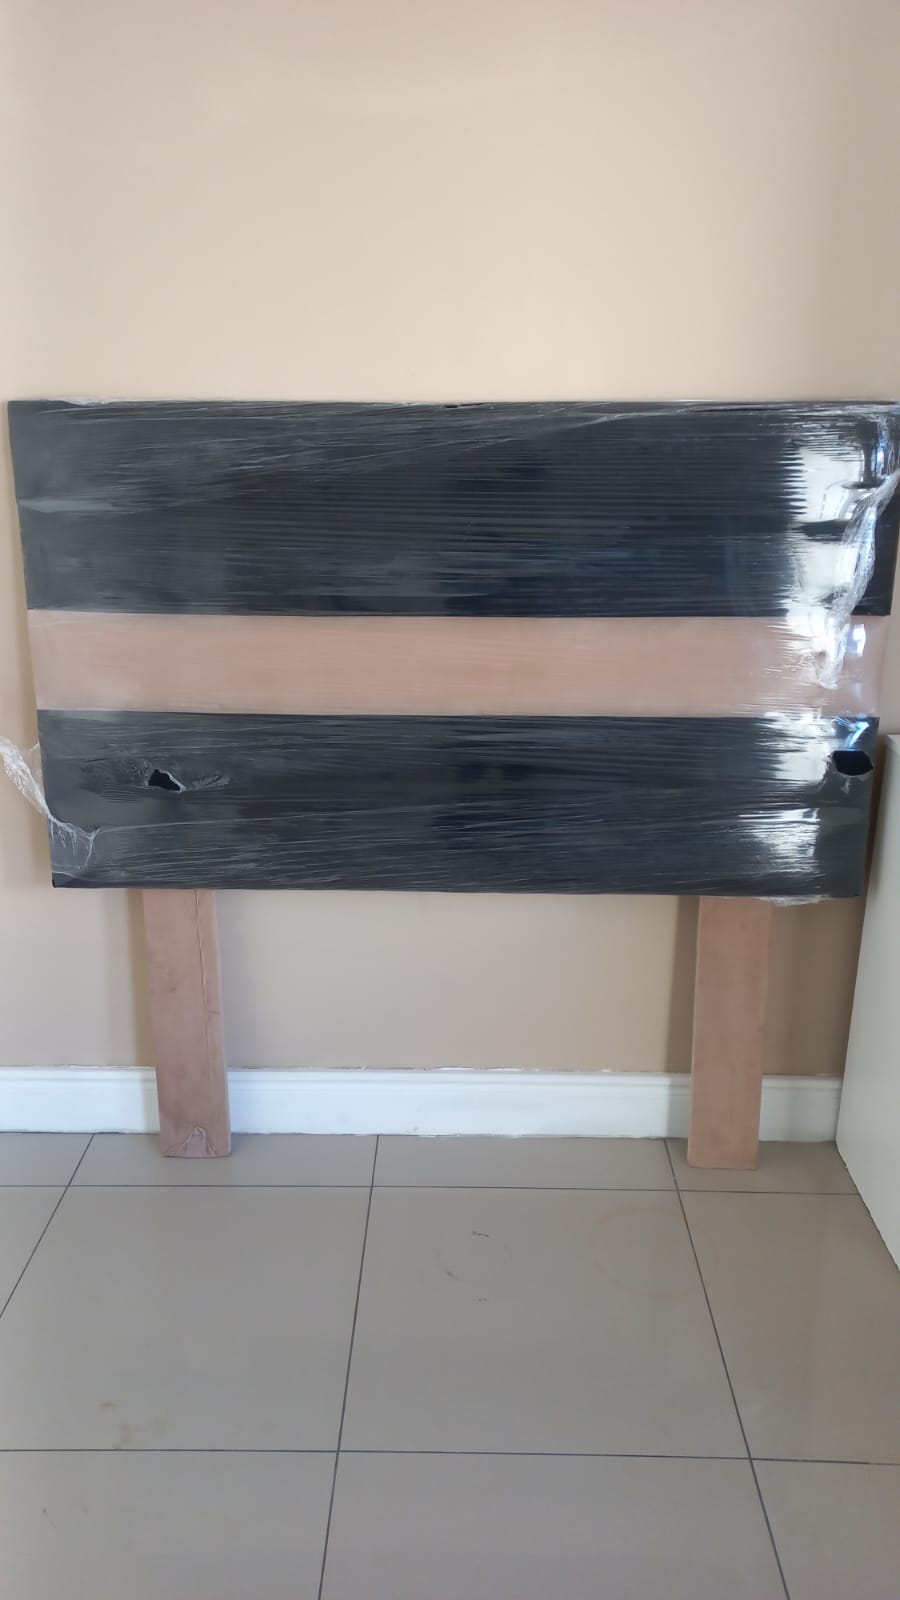 Brand new Headboard for Sale (Queen size)